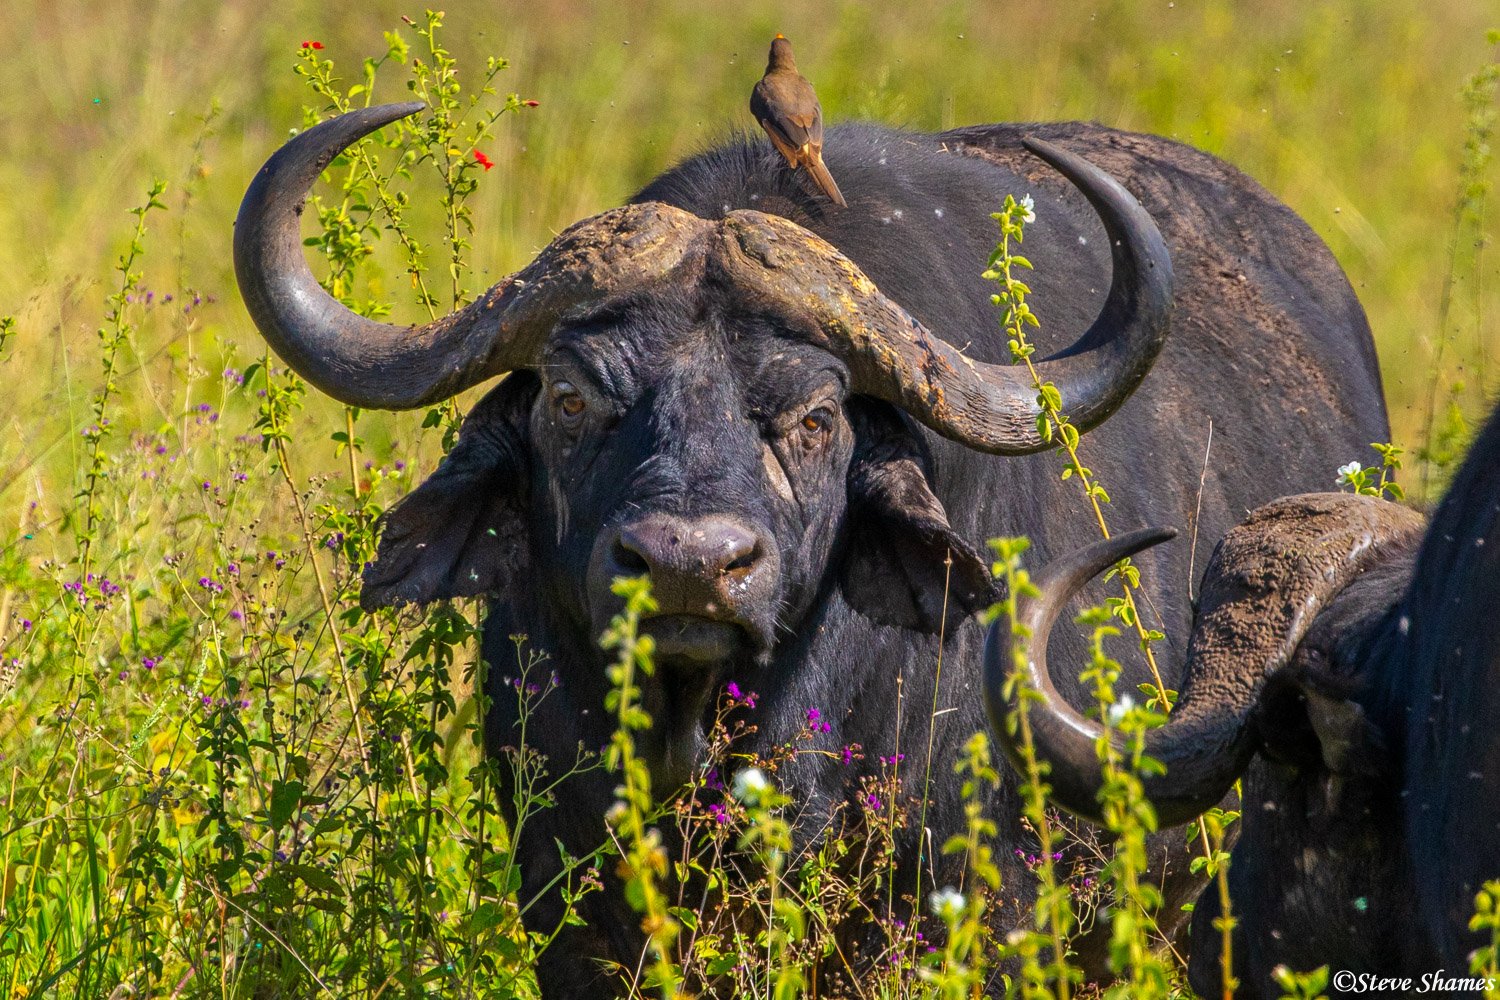 Cape buffalo could win a staring contest against any other animal. They are good at it.